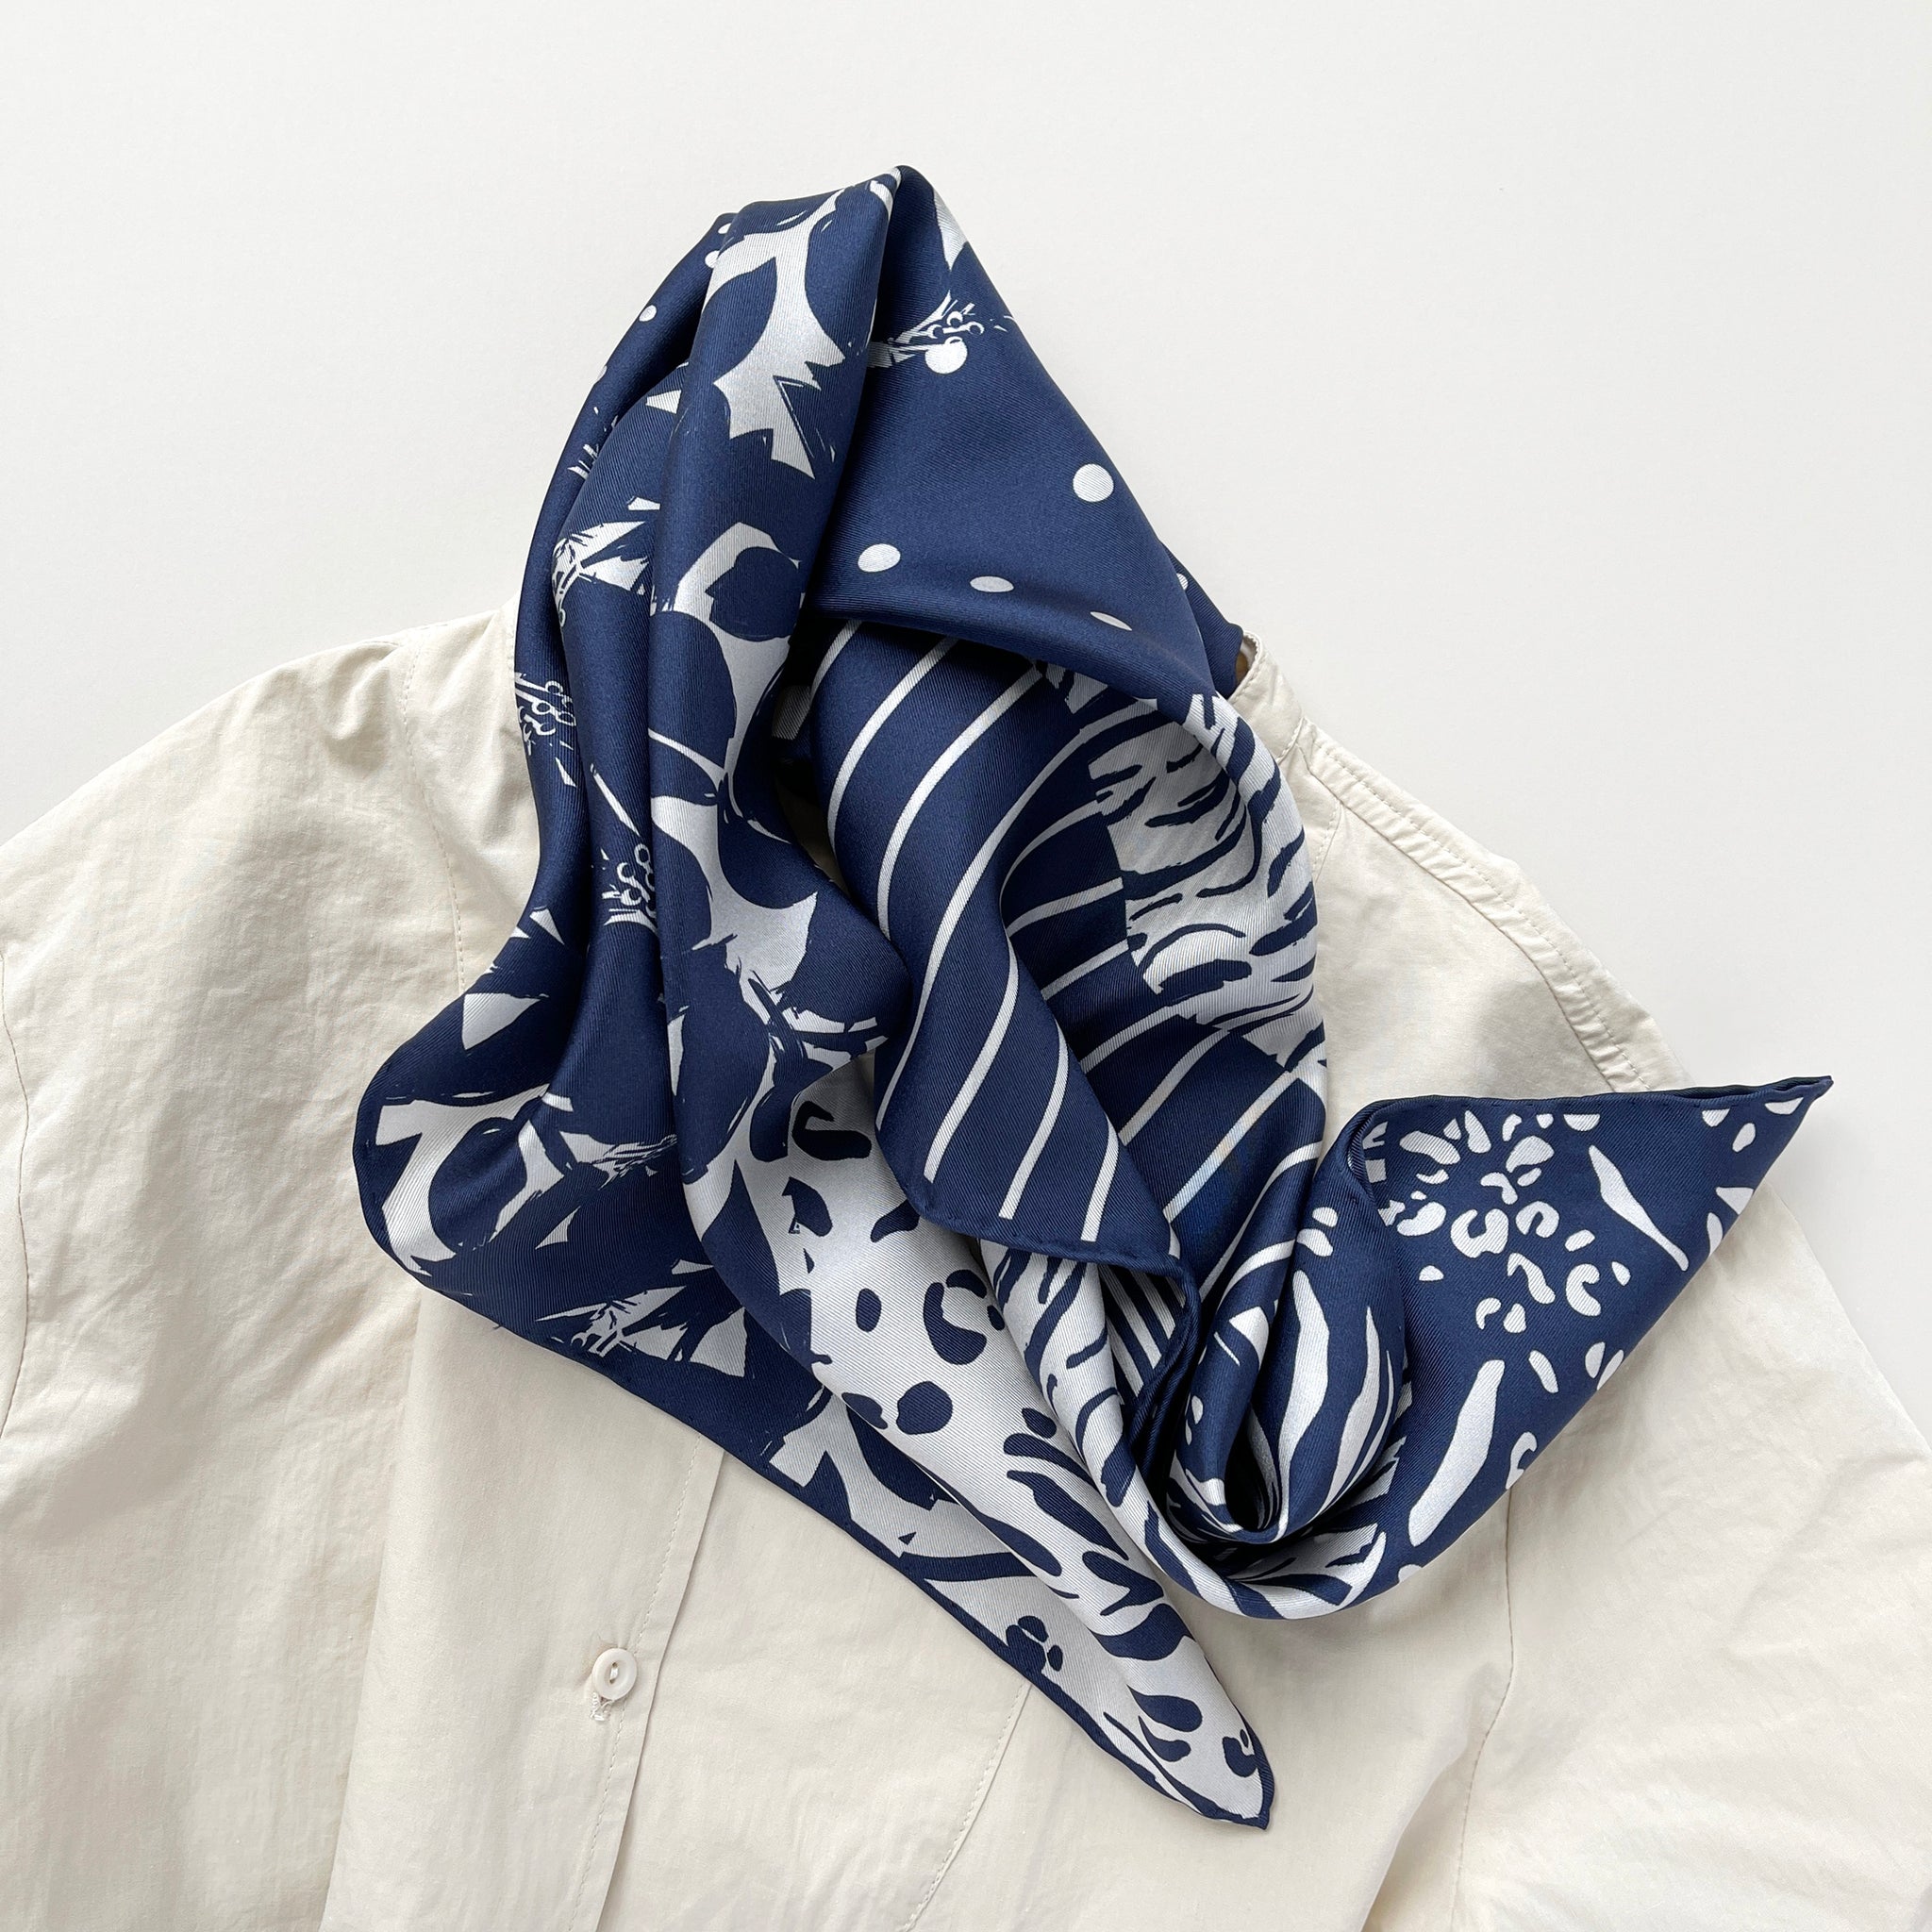 a navy blue and white square silk scarf featuring the combination of floral motifs, polka dots, and stripes prints with hand-rolled edges, paired with a light beige women's shirt